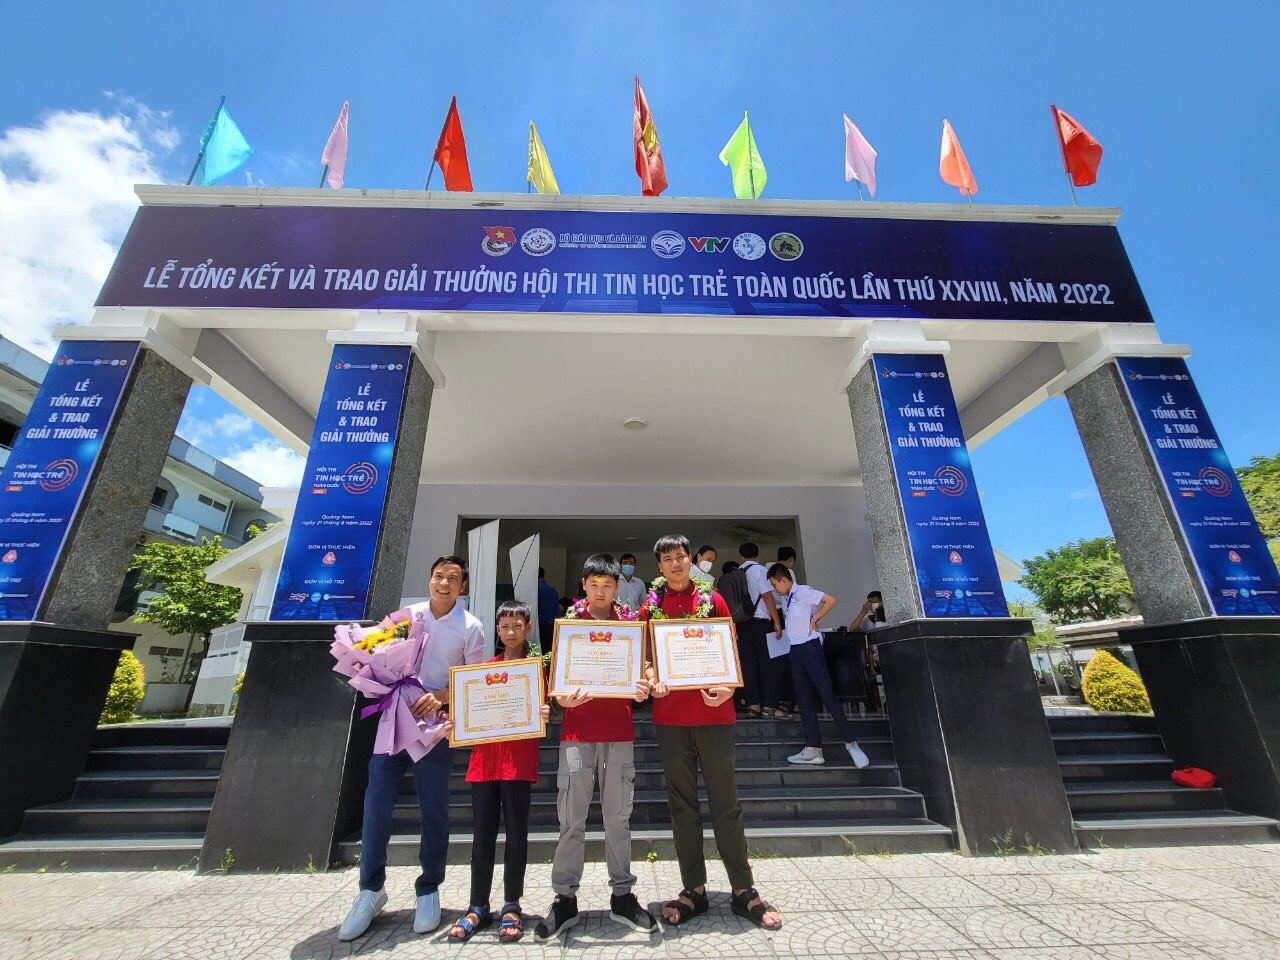 Victoria Thang Long’s students team win the highest awards in table d2 – Nationwide information student conference in 2022